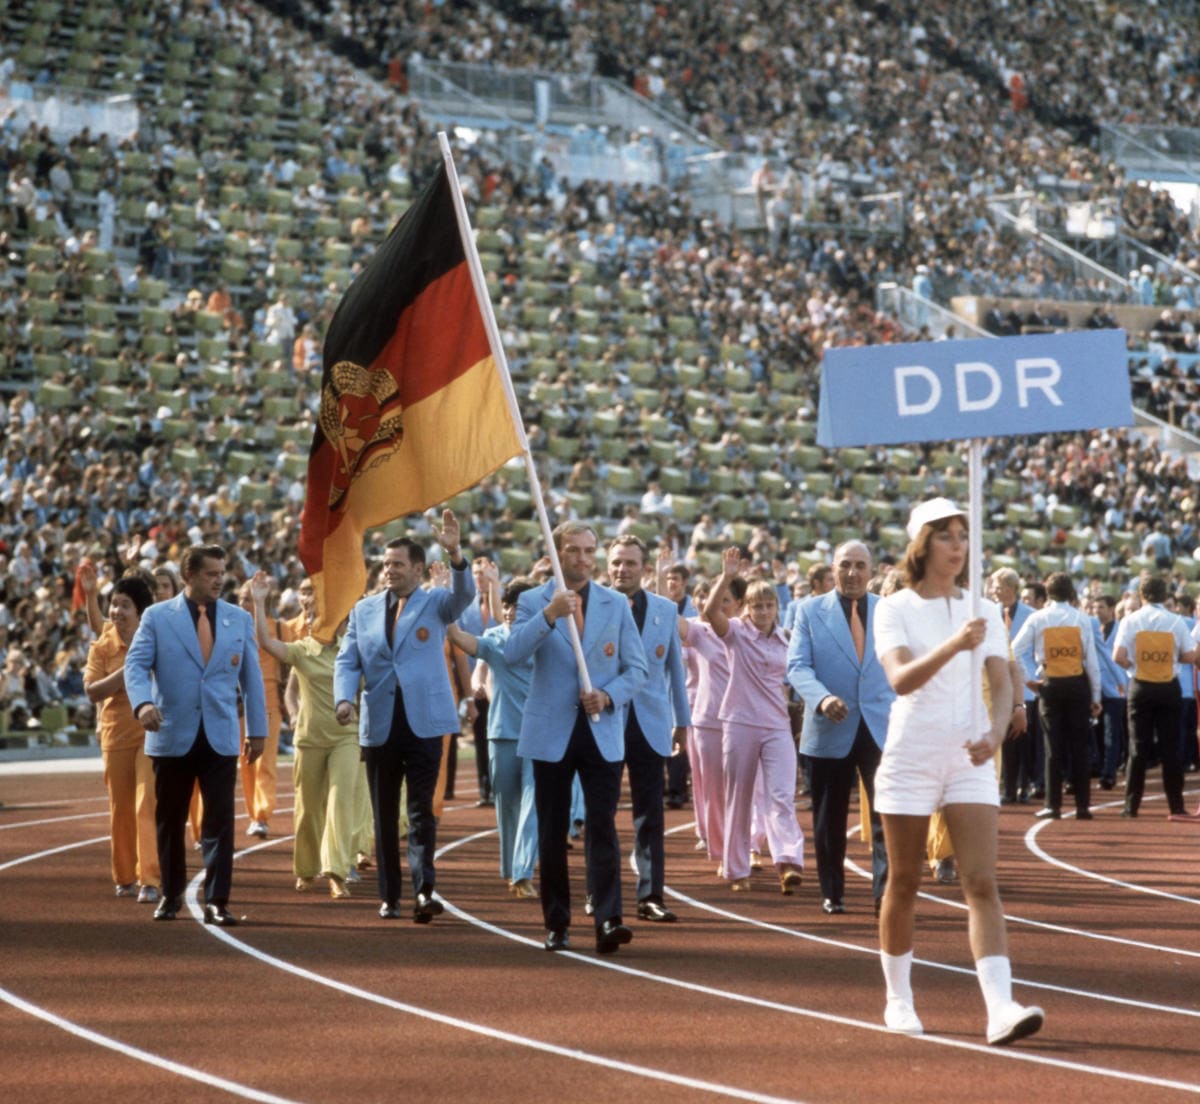 Sportvereinigung (SV) Dynamo To boost the prestige of the DDR, sports trainers, supervised by members of the StaSi, doped athletes in the Dynamo Sports Association, both knowingly and unknowningly, between 1971 and 1989. Only 1 athlete was ever disqualified(Bd: Werner Schulze)